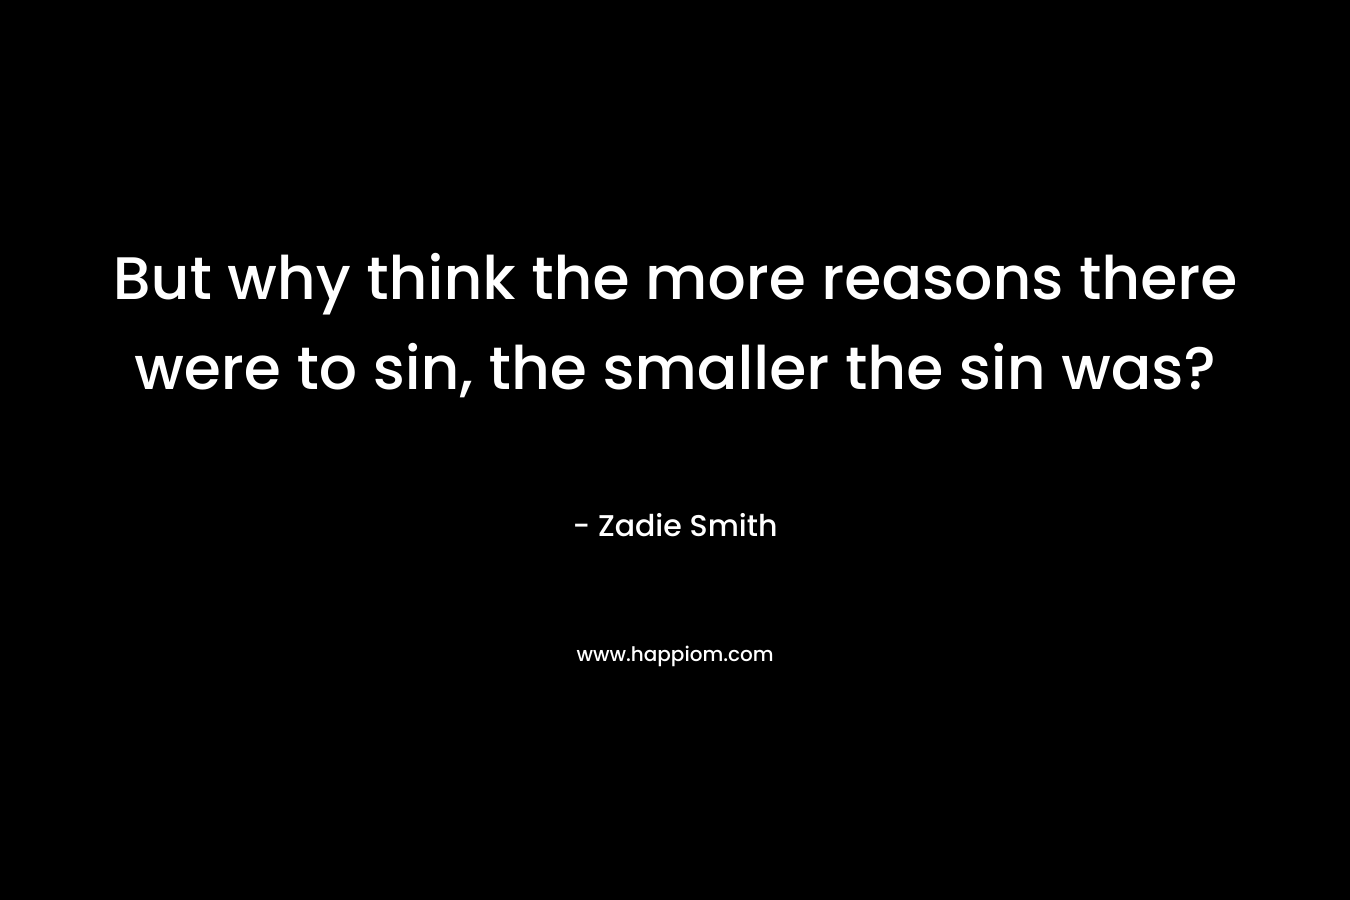 But why think the more reasons there were to sin, the smaller the sin was?